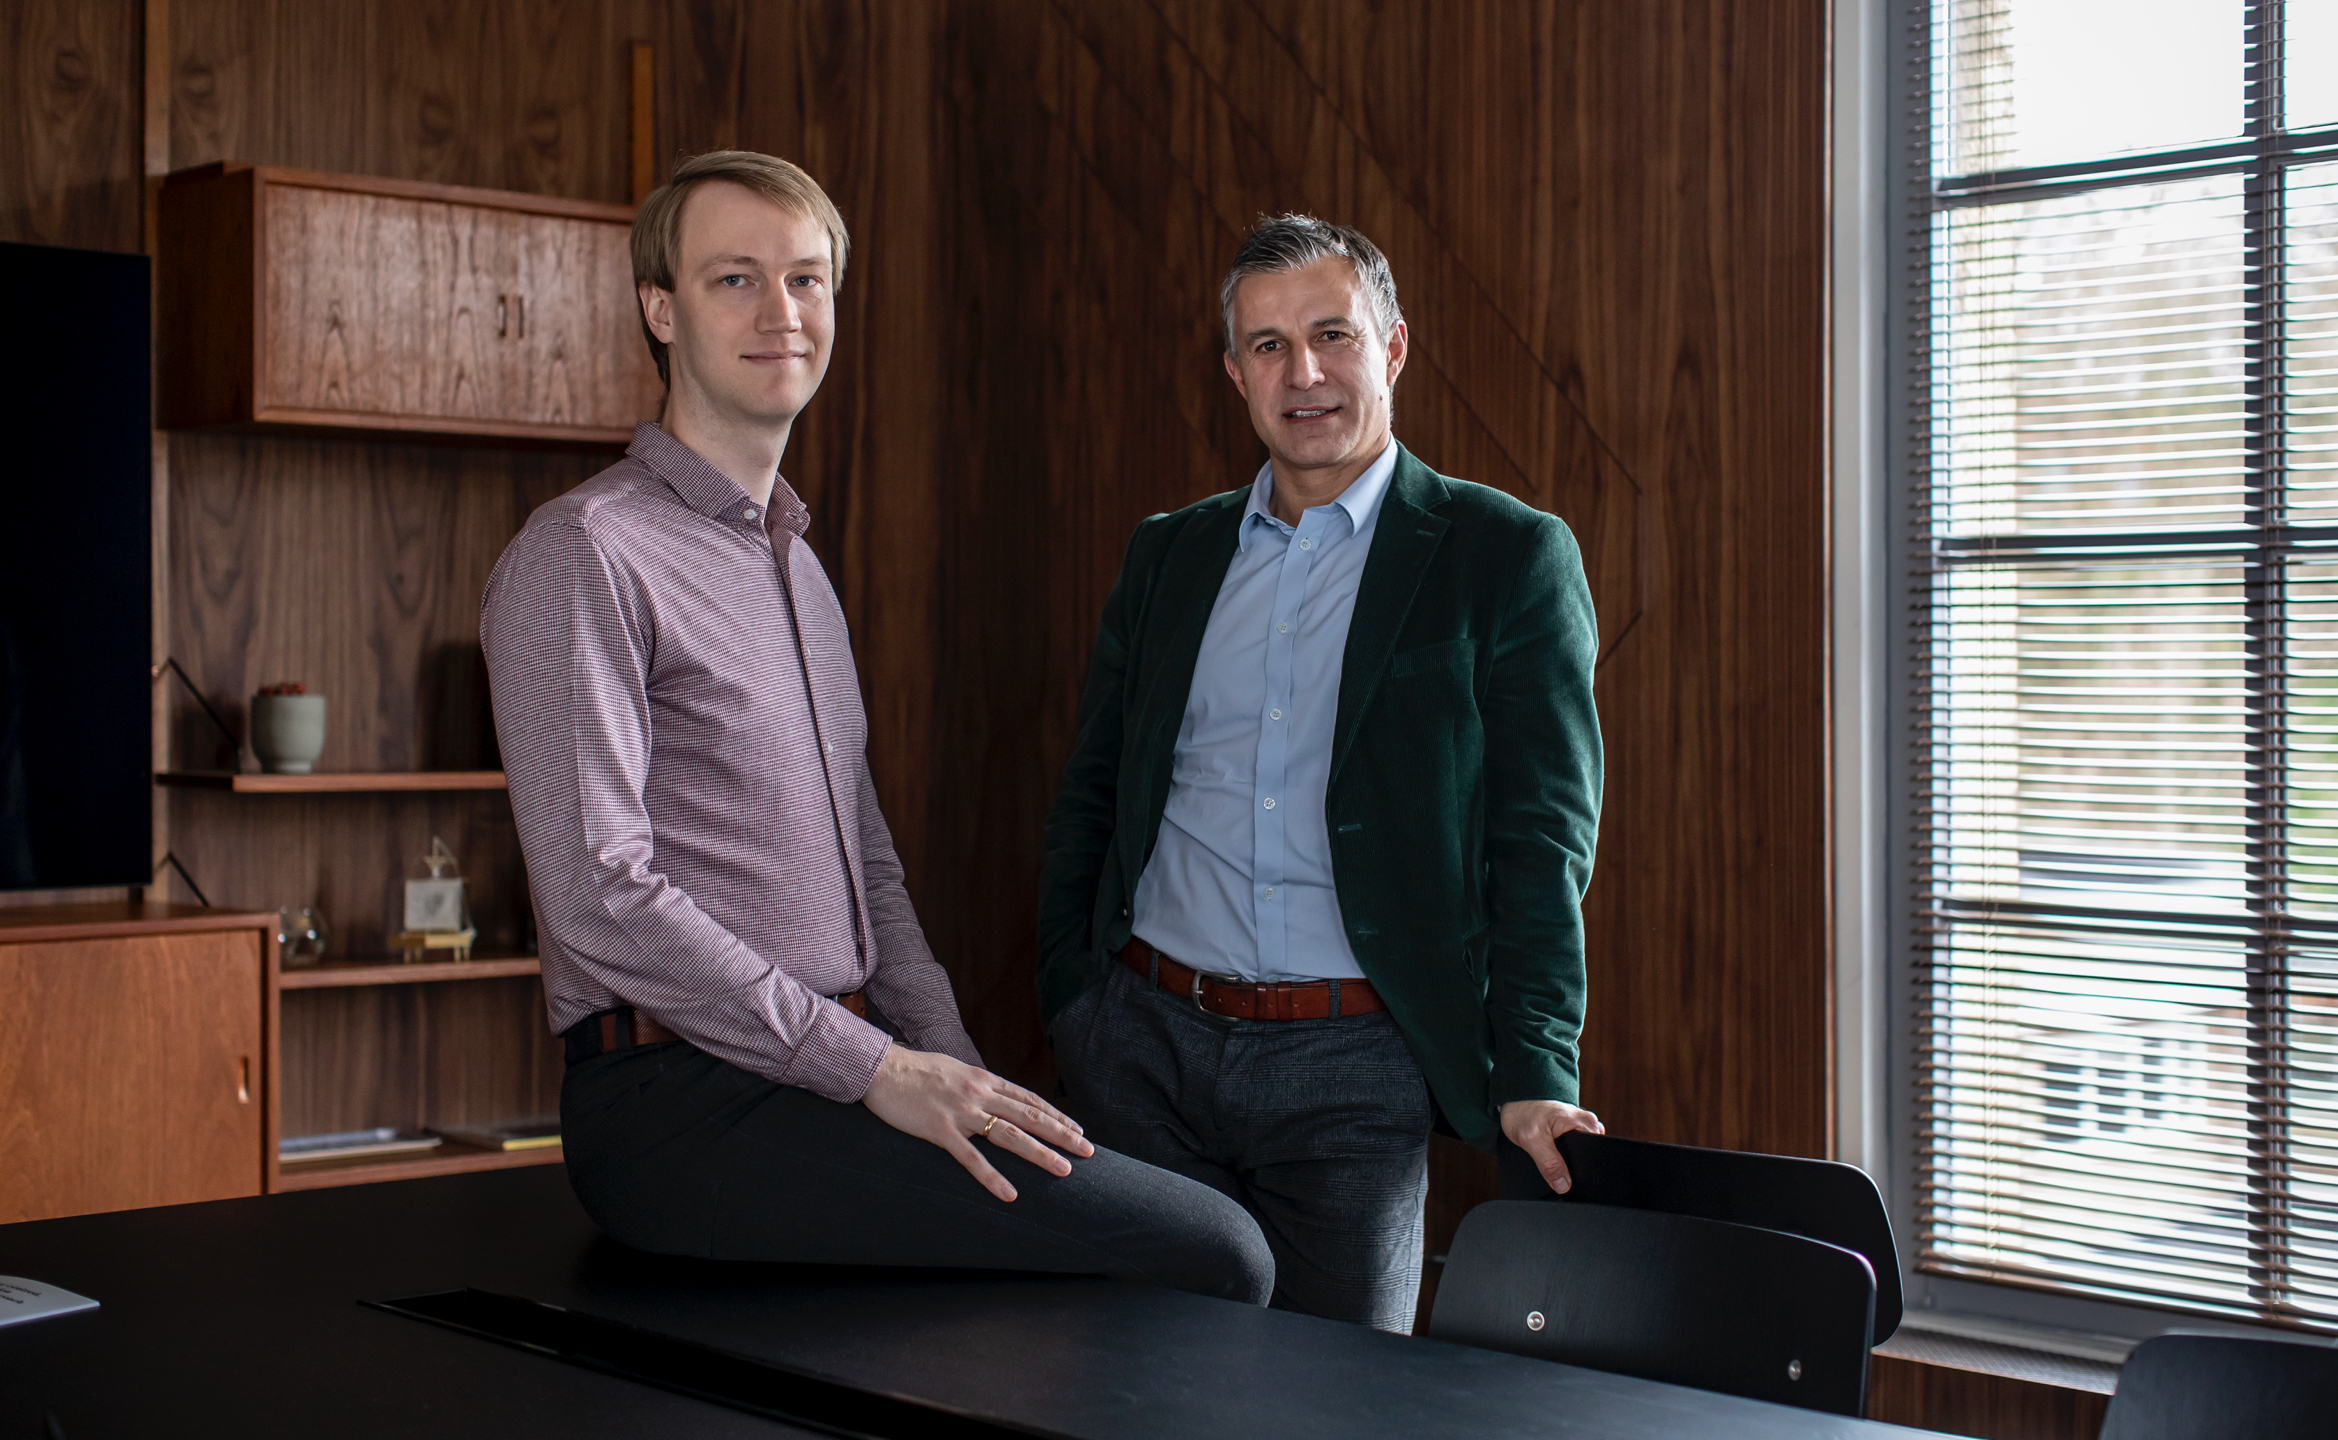 InvestSuite raises €3 million bringing the total amount of funding to €9 million